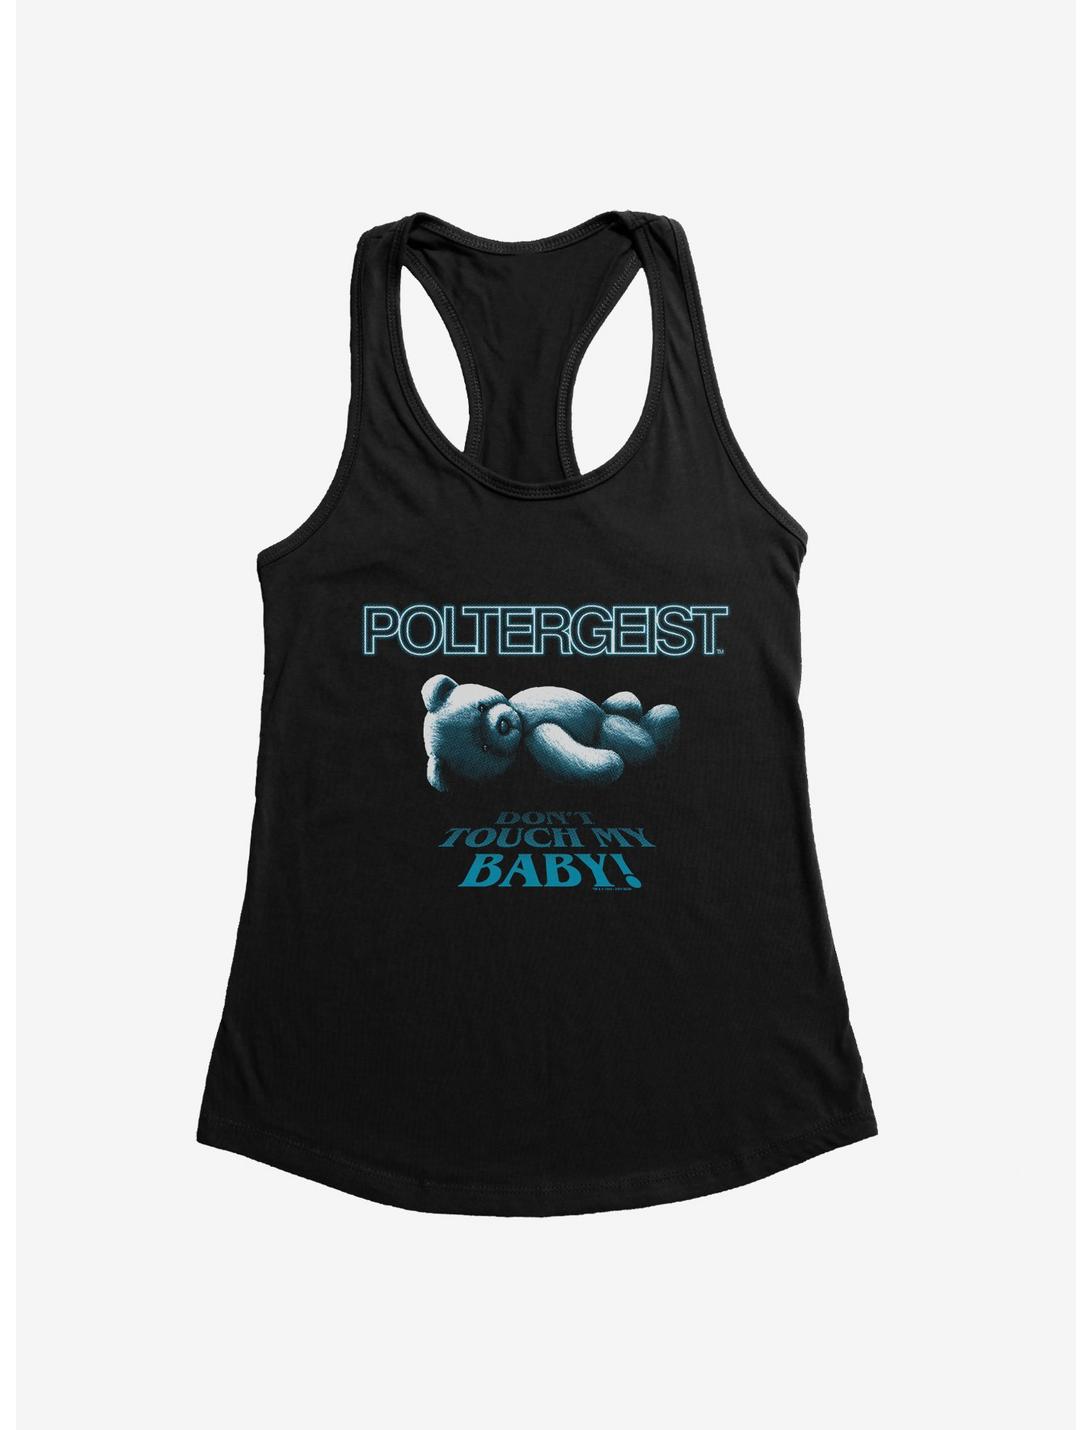 Poltergeist Don't Touch My Baby! Womens Tank Top, BLACK, hi-res